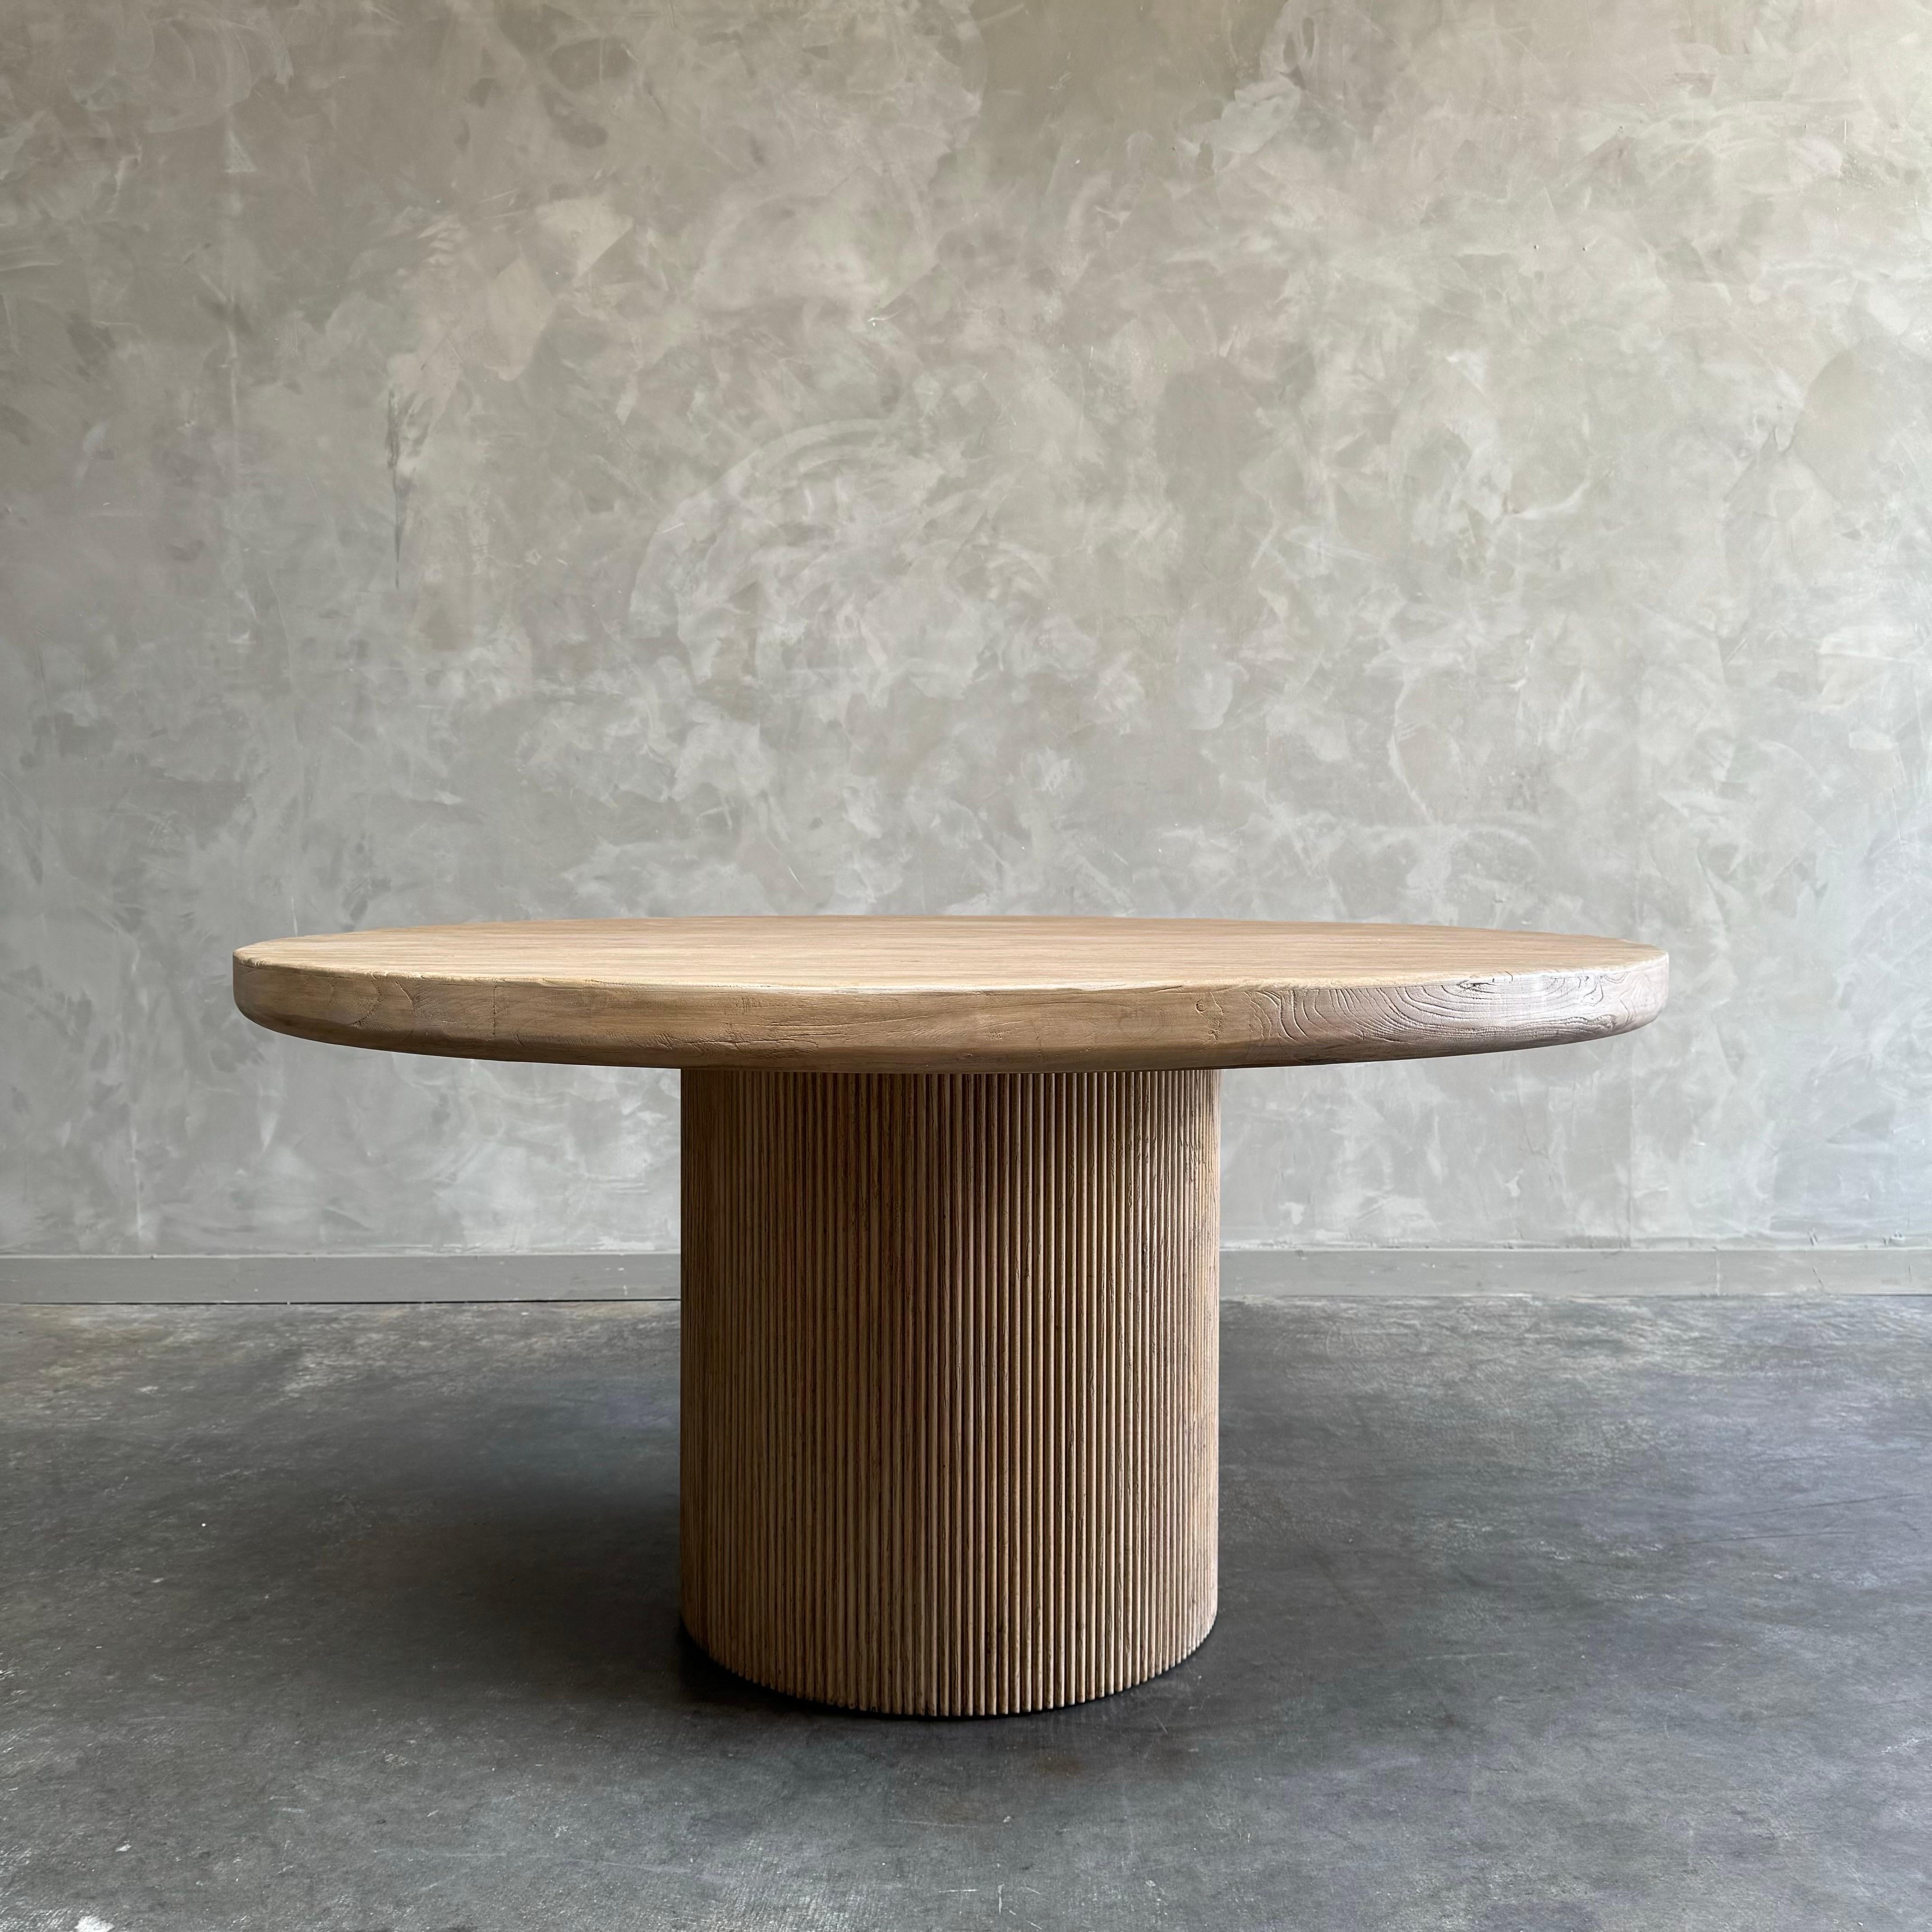 Nori dining table 60”rd. X 30”hWith a fluted column table base, the Nikki Dining Table is a modern minimalist's dream.

Made of solid elm, the table's finish highlights the natural grain and beauty of the wood.

Due to the handmade construction and